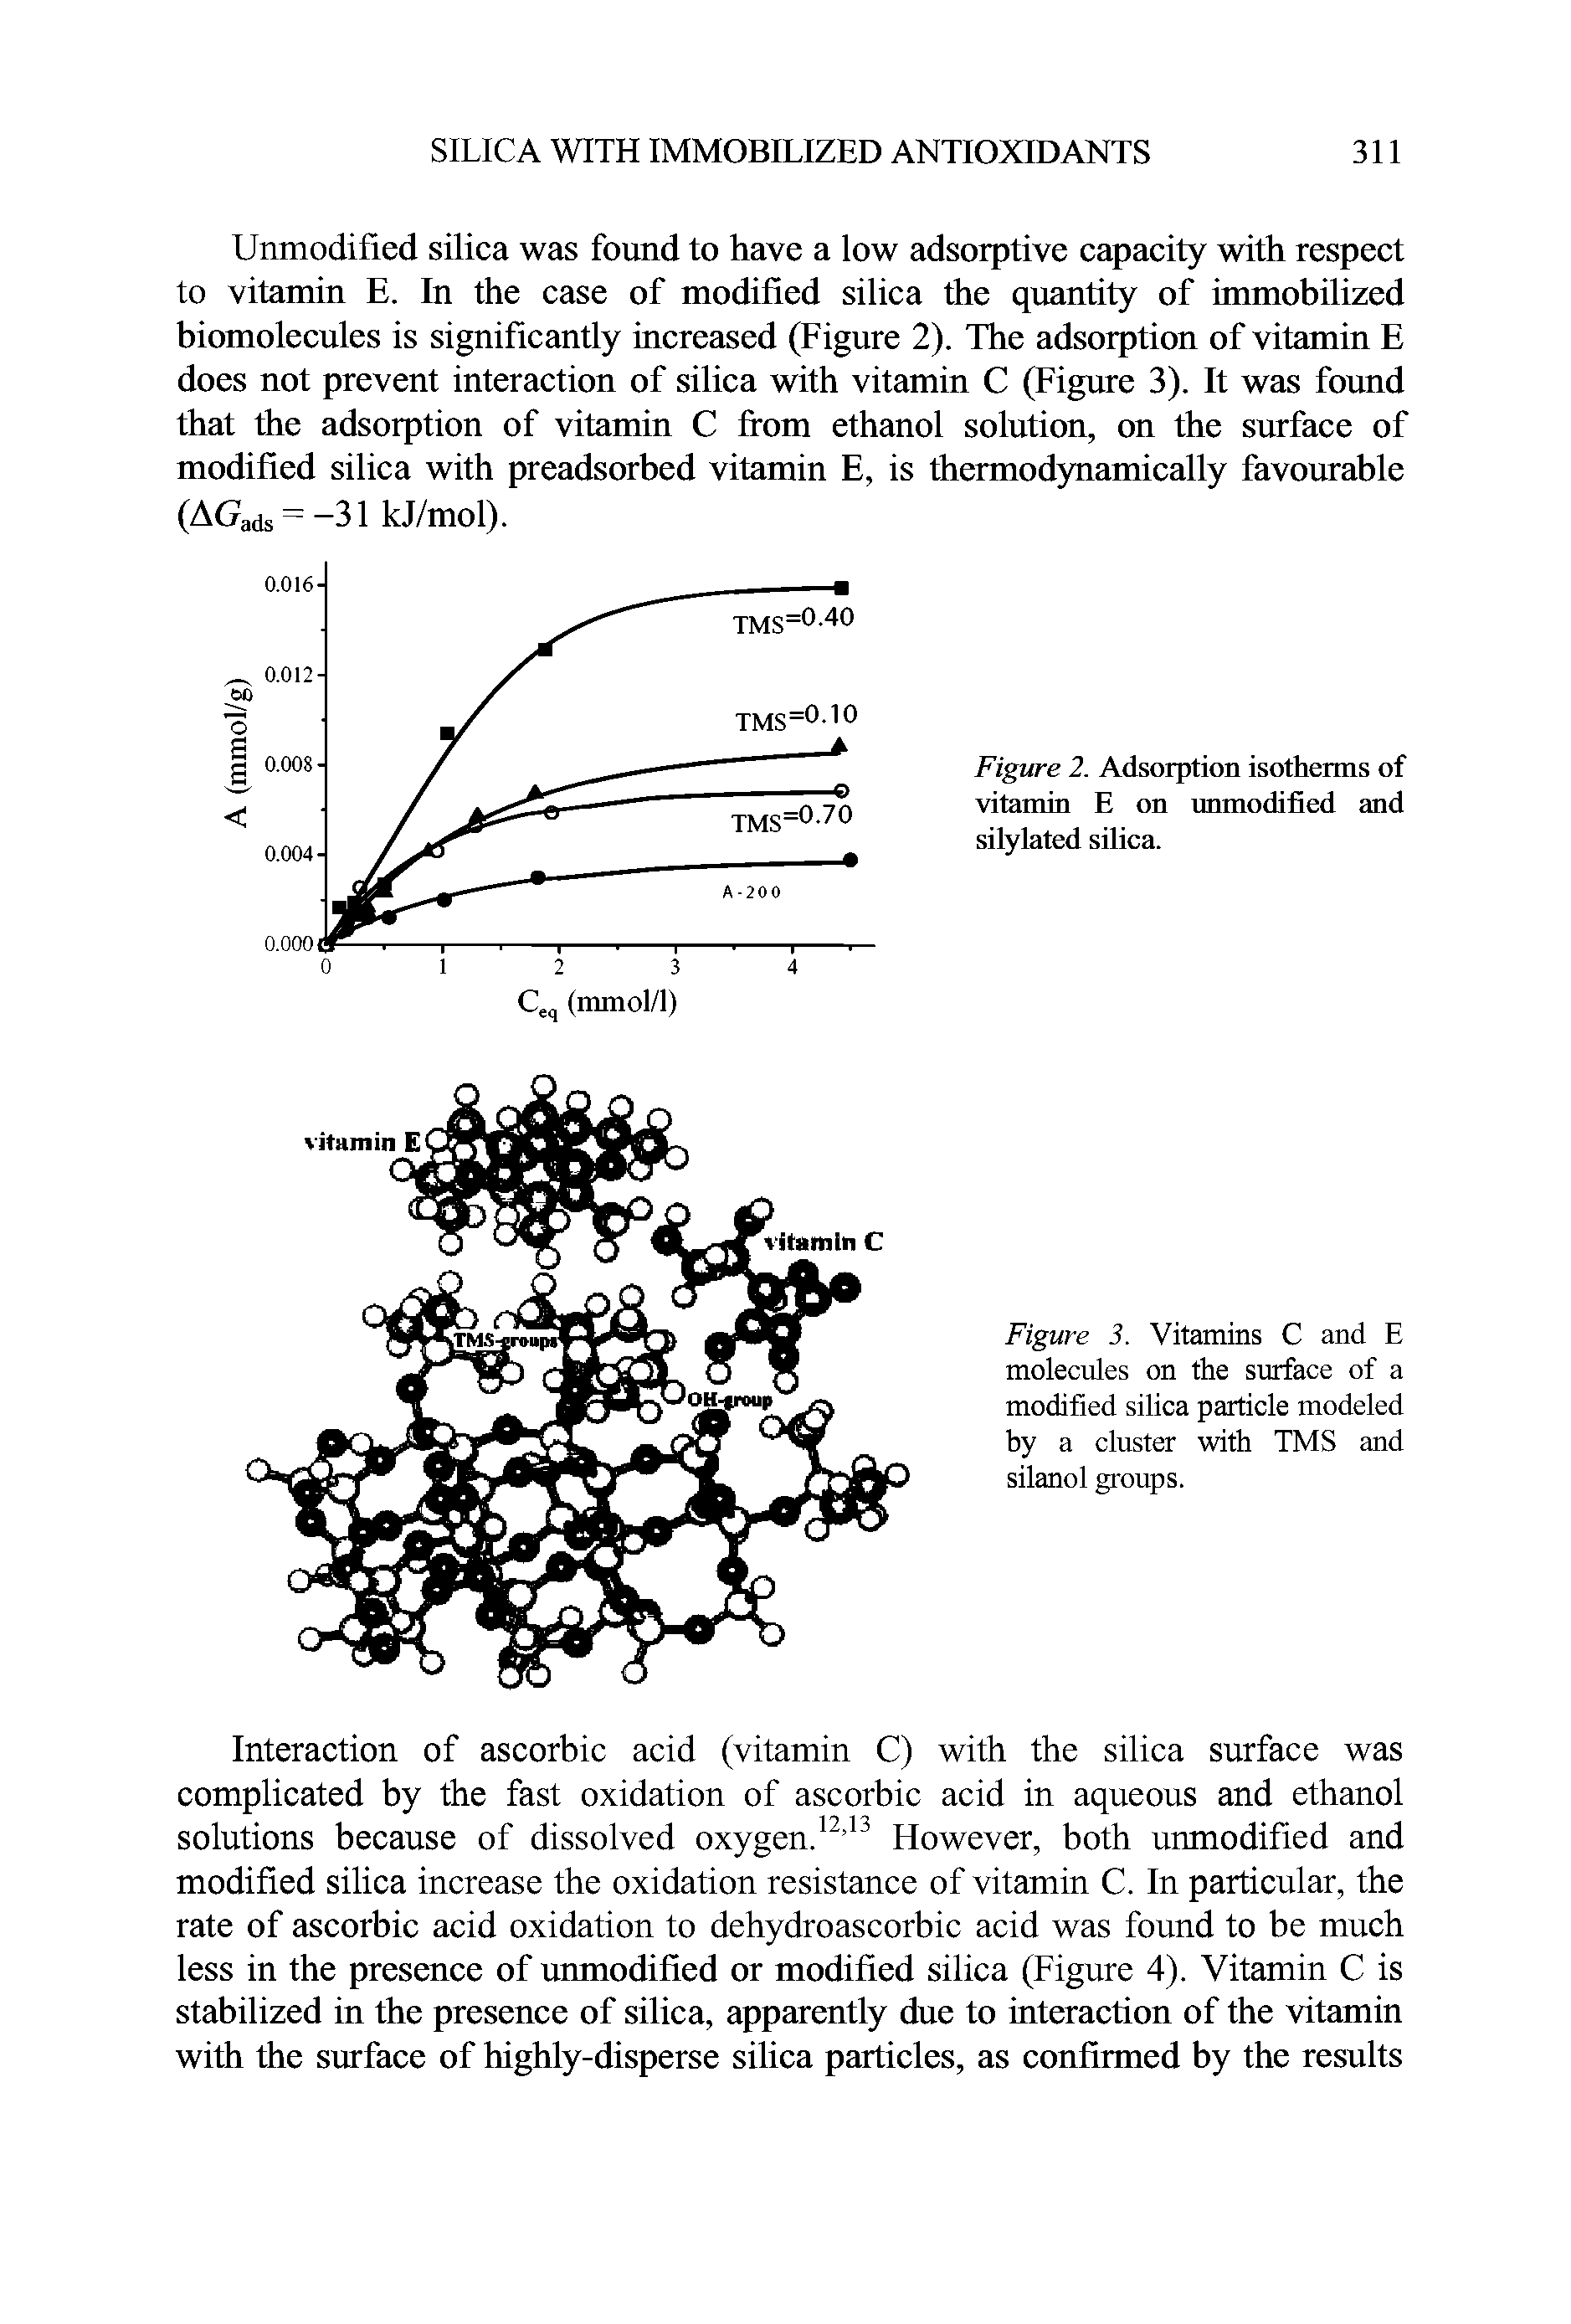 Figure 3. Vitamins C and E molecules on the surface of a modified silica particle modeled by a cluster with TMS and silanol groups.